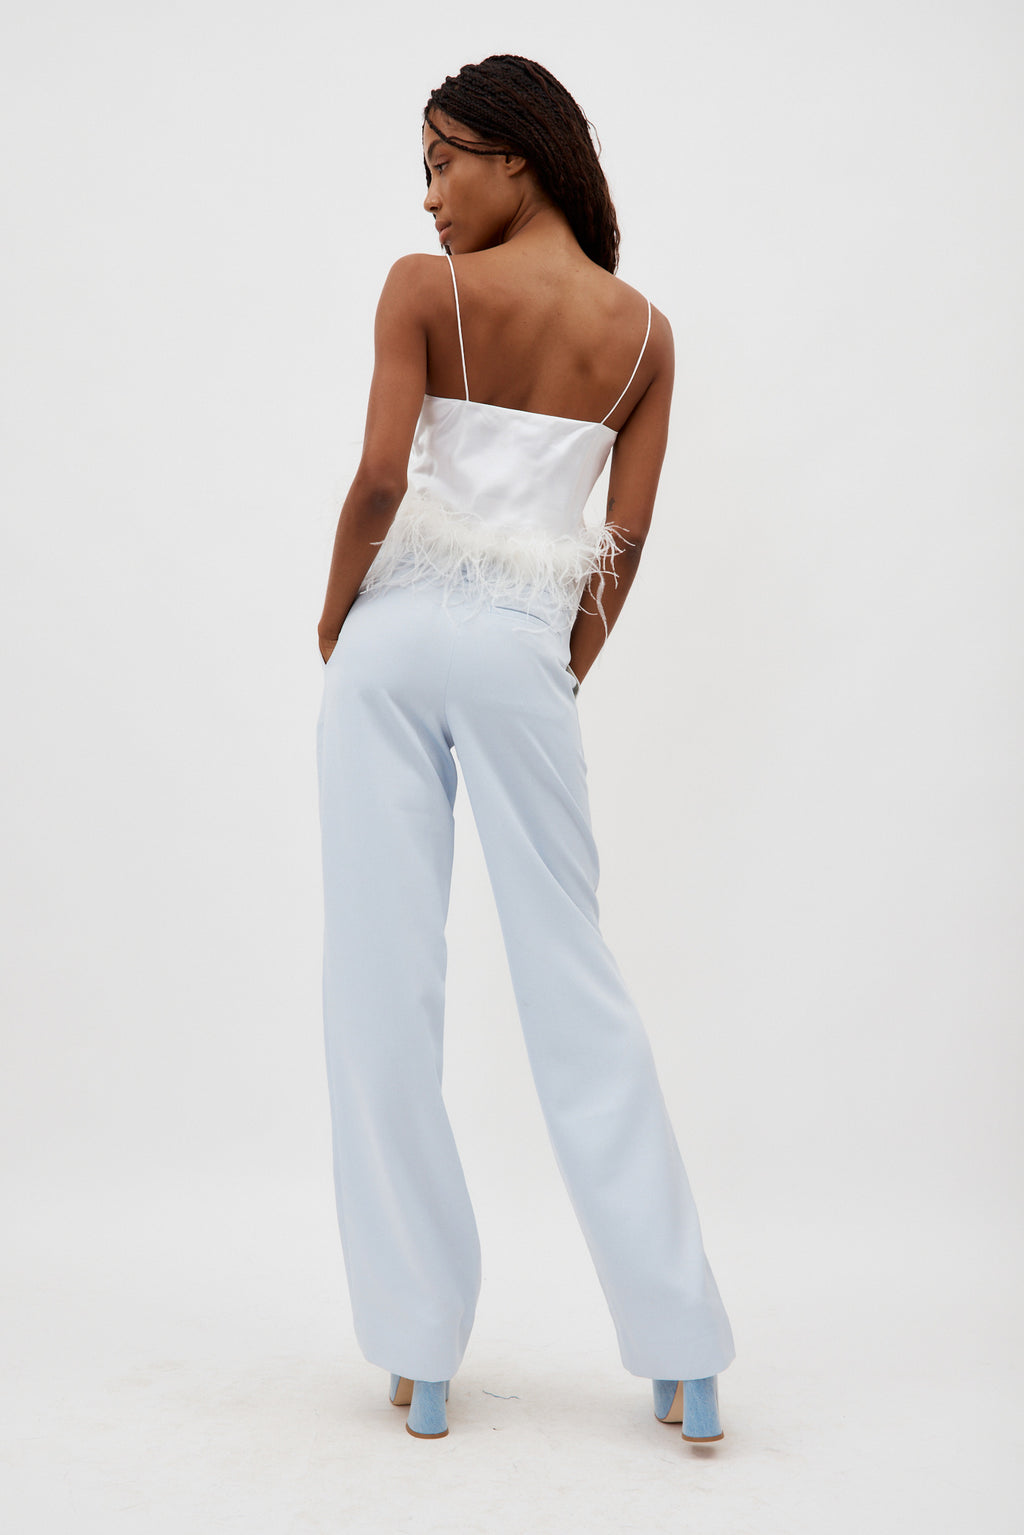 Bias White Camisole with Ostrich Feathers